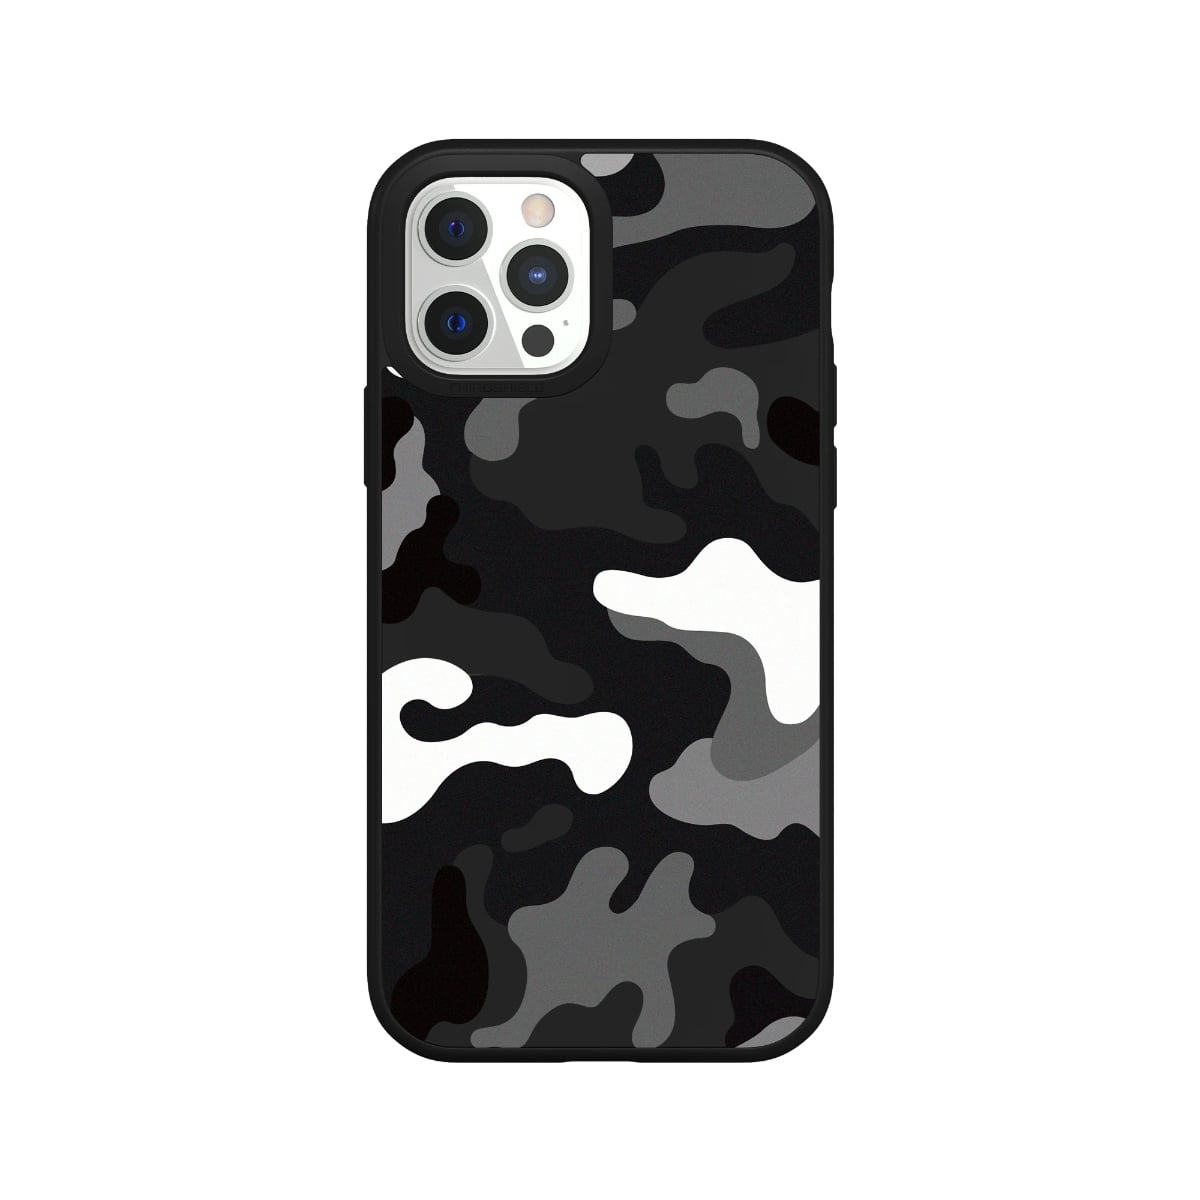 RhinoShield SolidSuit Case for iPhone 12 Pro Max SSA0118752 B&H